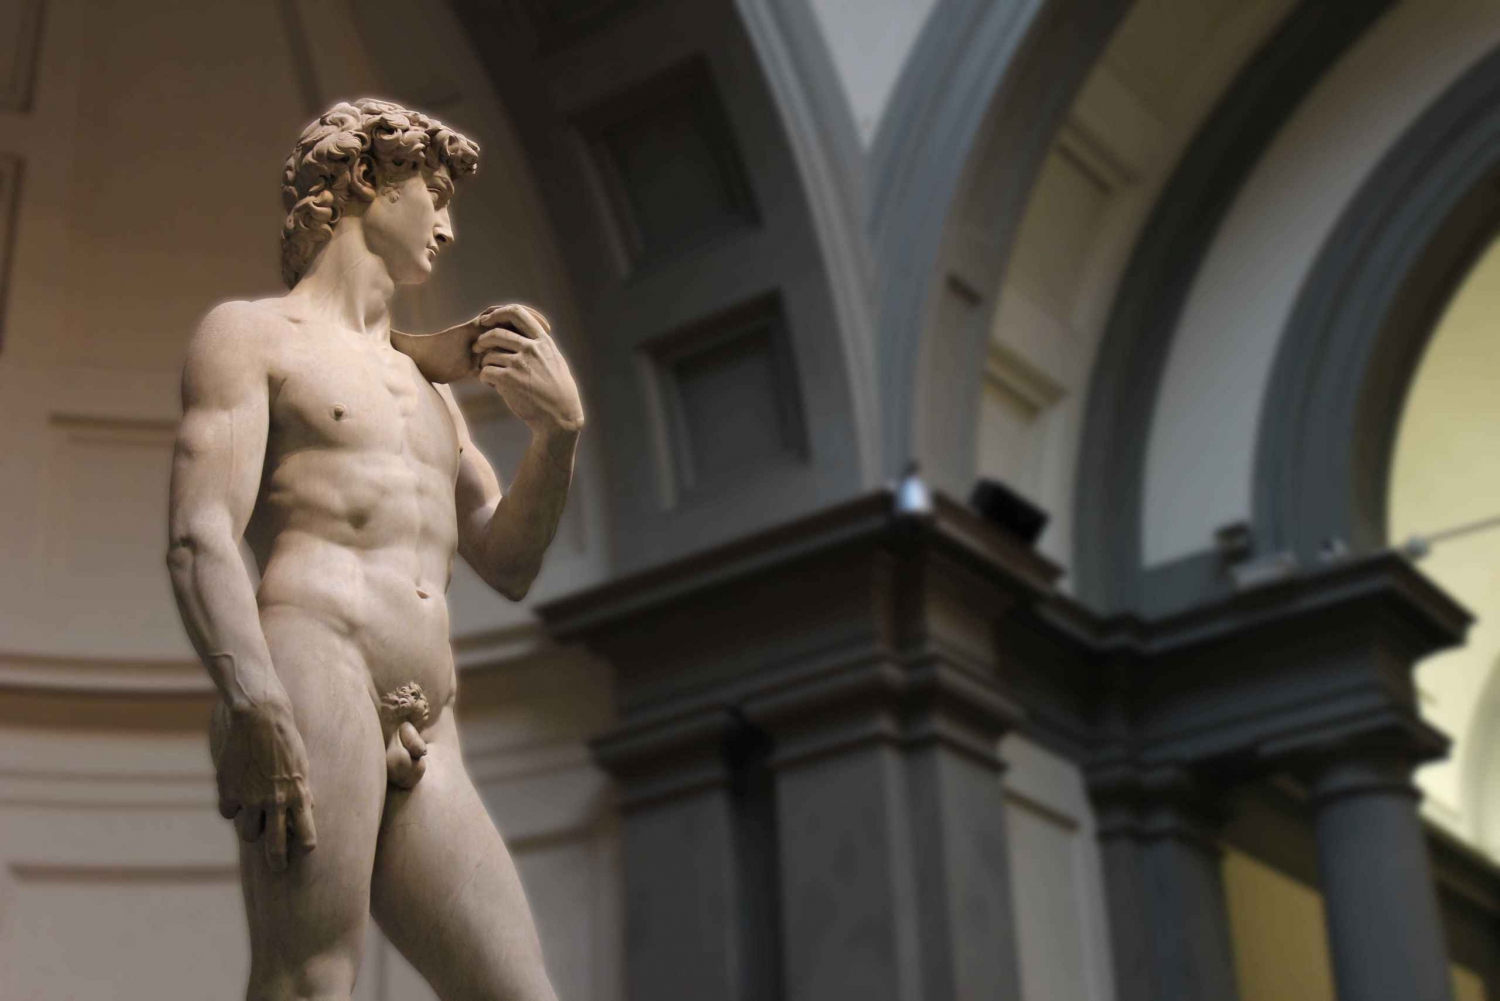 Private Day Tour: Florence with Accademia and Uffizi